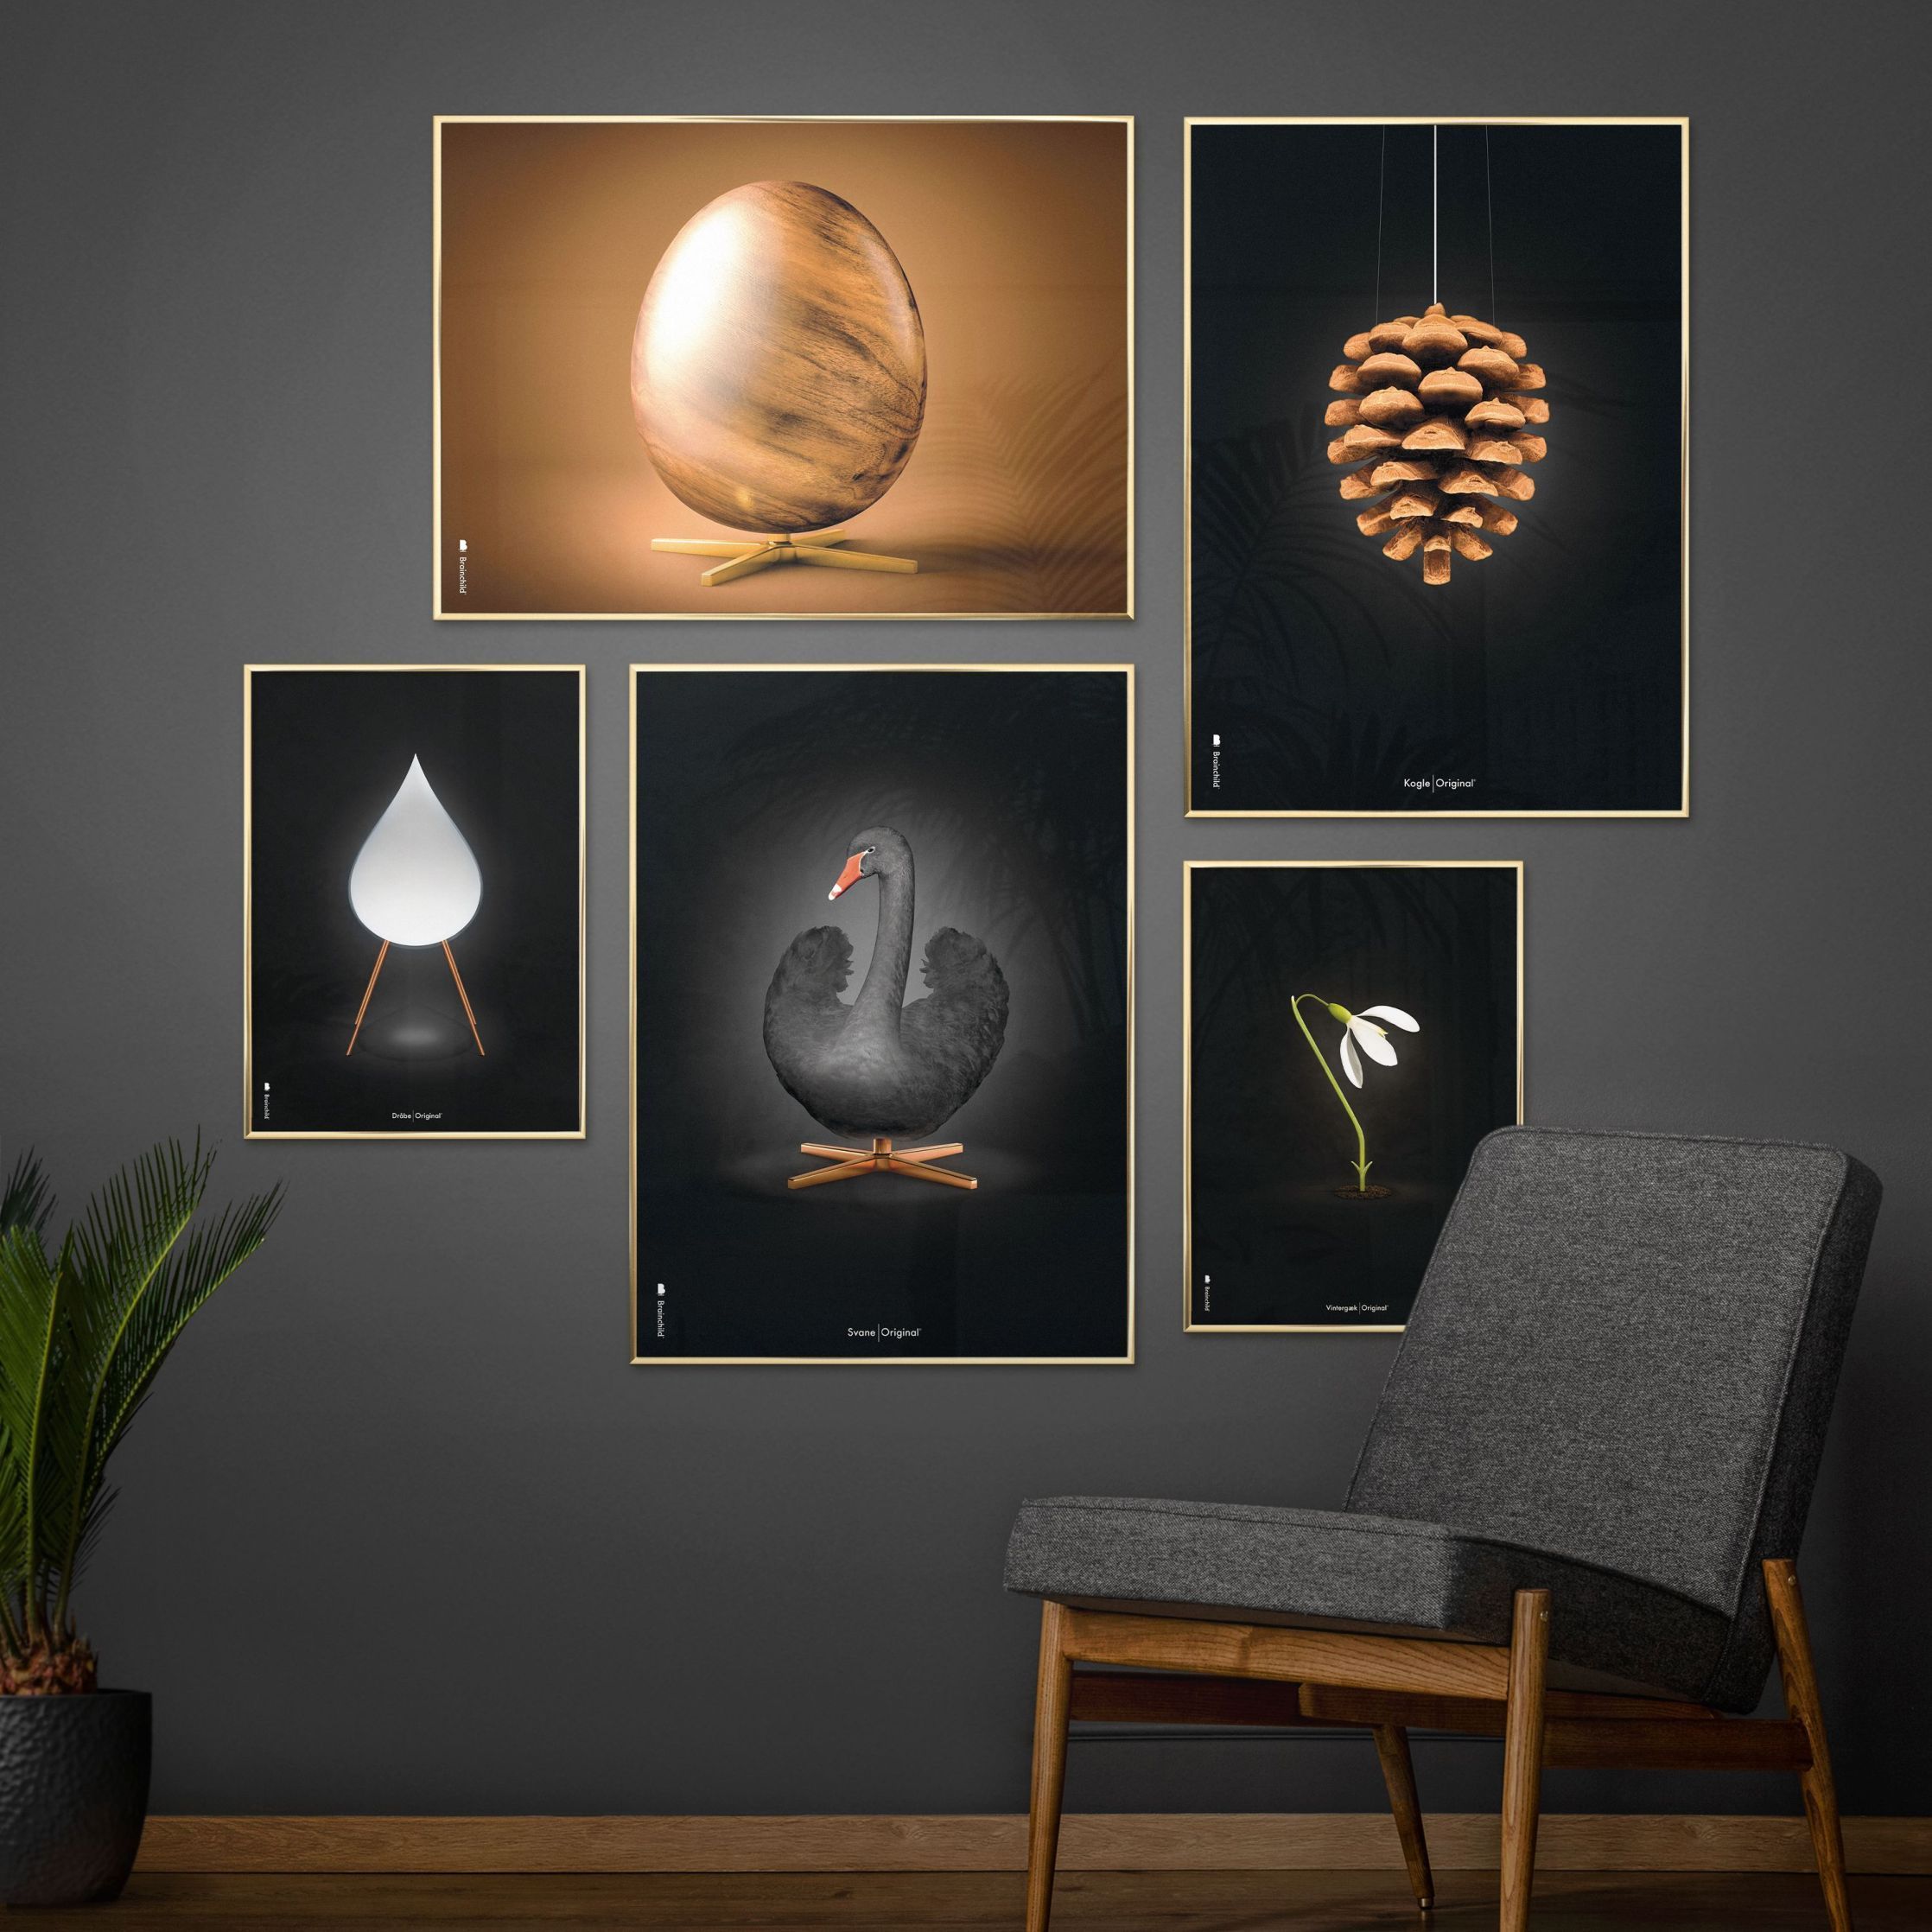 Brainchild Pine Cone Classic Poster, Frame In Black Lacquered Wood 30x40 Cm, Black Background